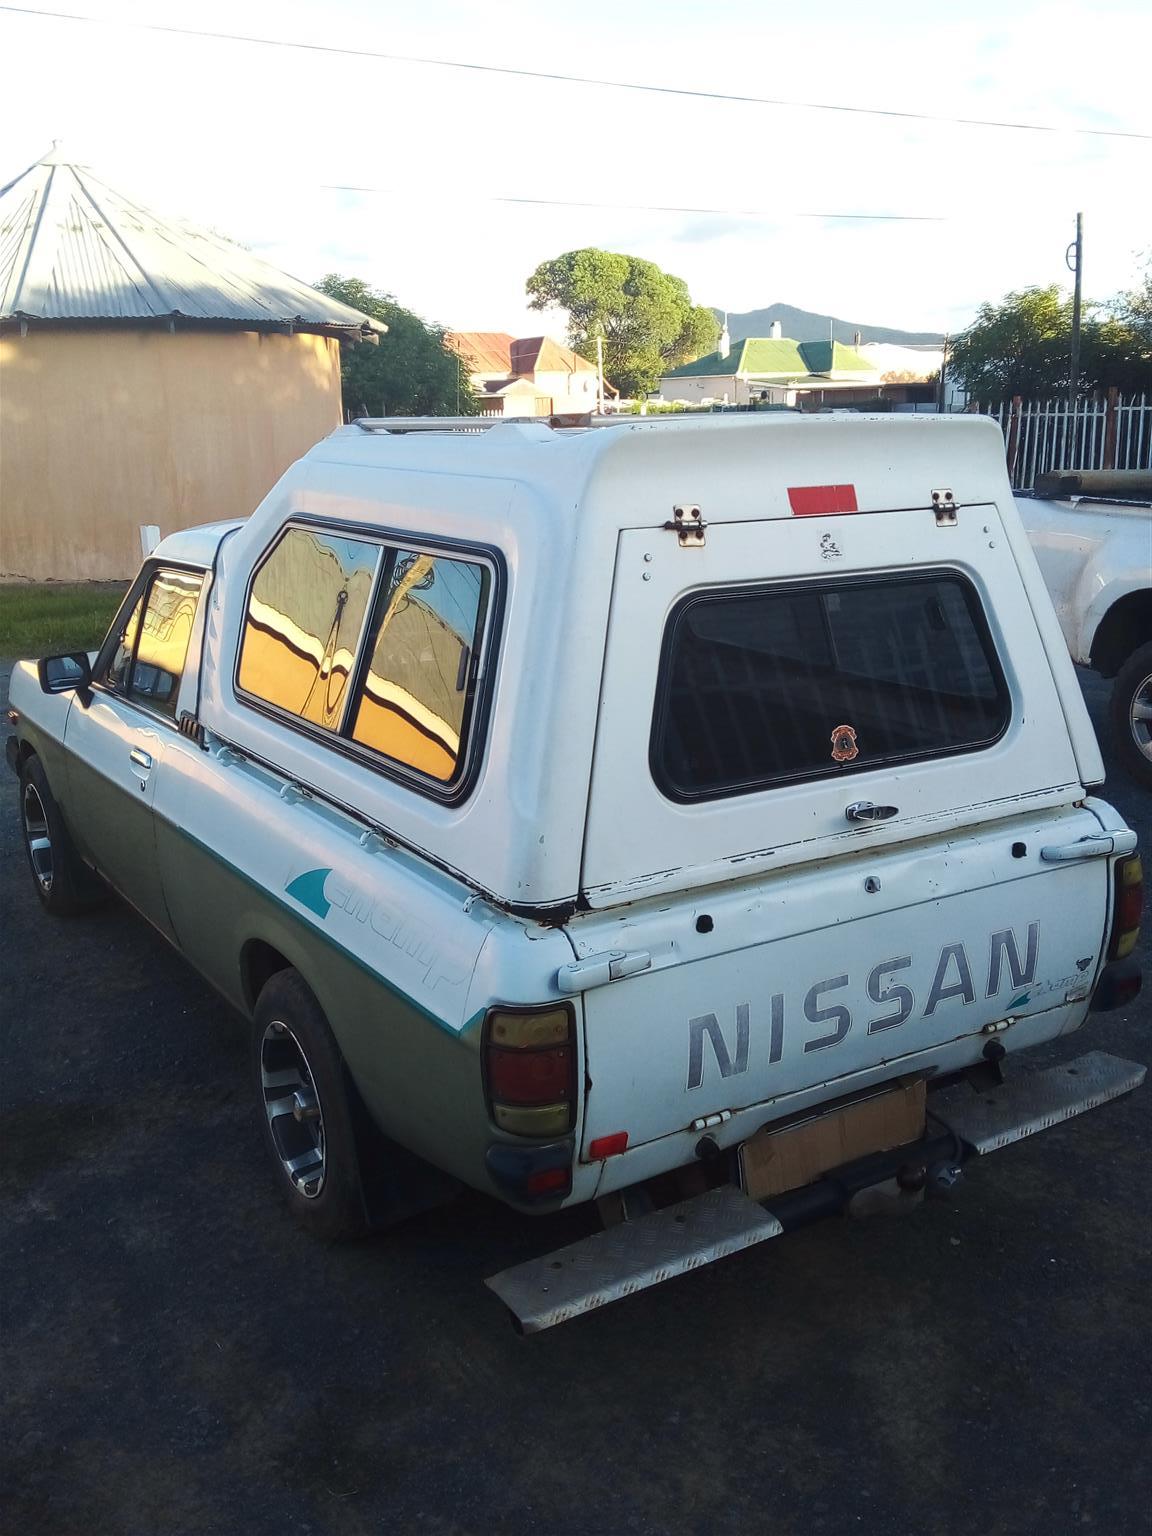 Nissan 1400 for sale im good condition.